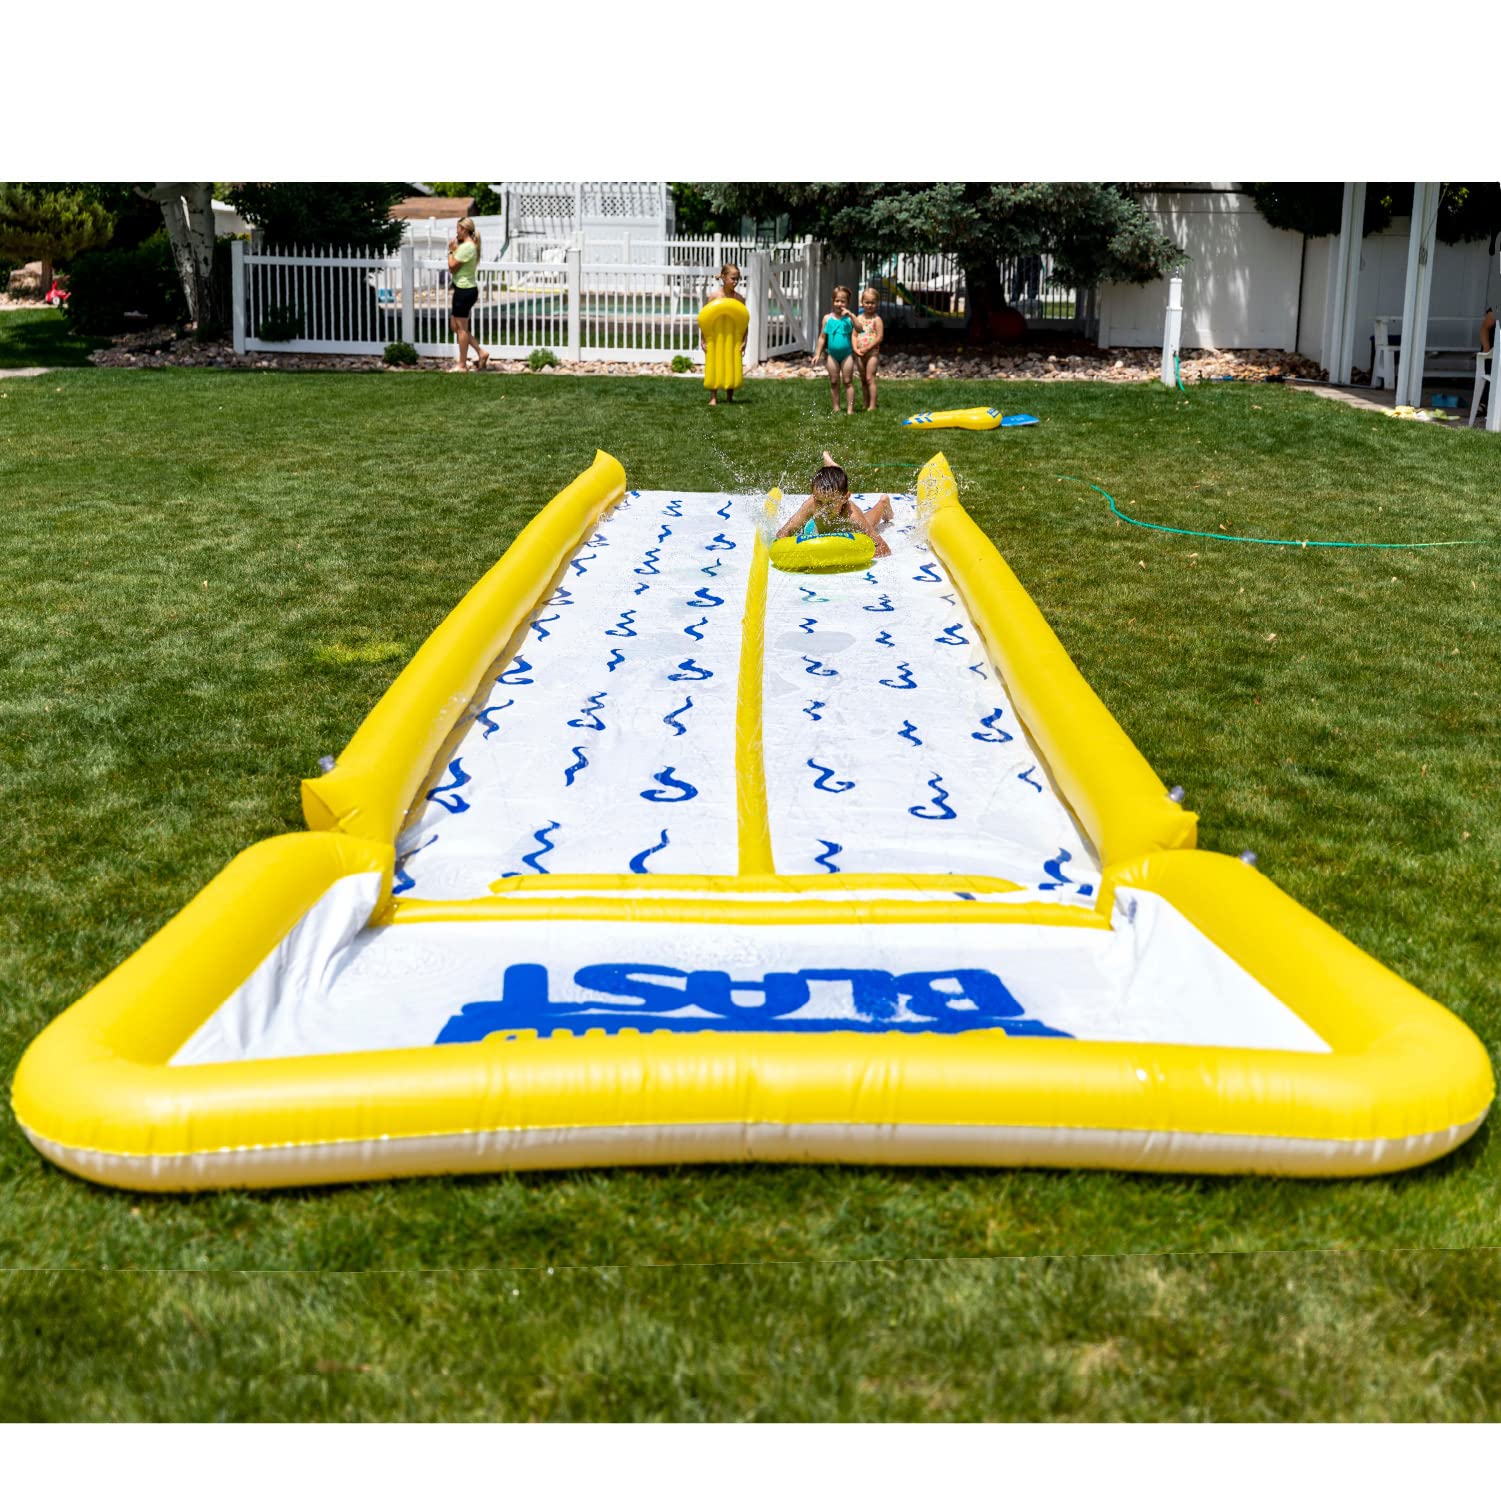 BACKYARD BLAST - 30' Waterslide with Bumpers and Splash Zone, 1 Inflatable Rider and Electric Pump - Easy to Setup - Extra Thick to Prevent Rips & Tears